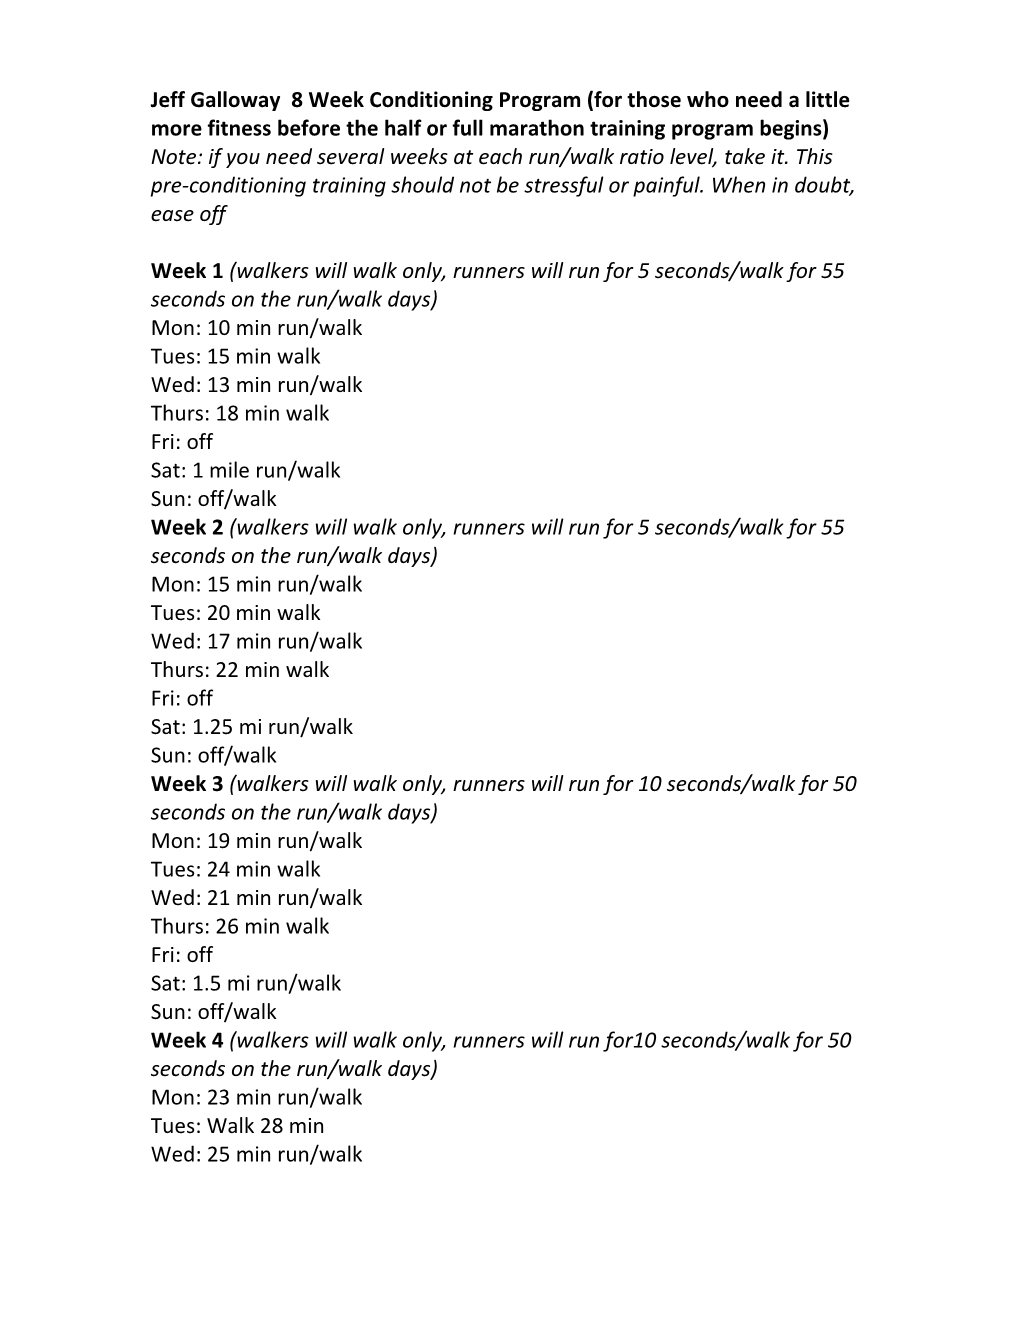 Conditioning Program (For Those Who Need A Little More Fitness Before The Program Begins) Note: If You Need Several Weeks At Each Run/Walk Ratio Level, Take It